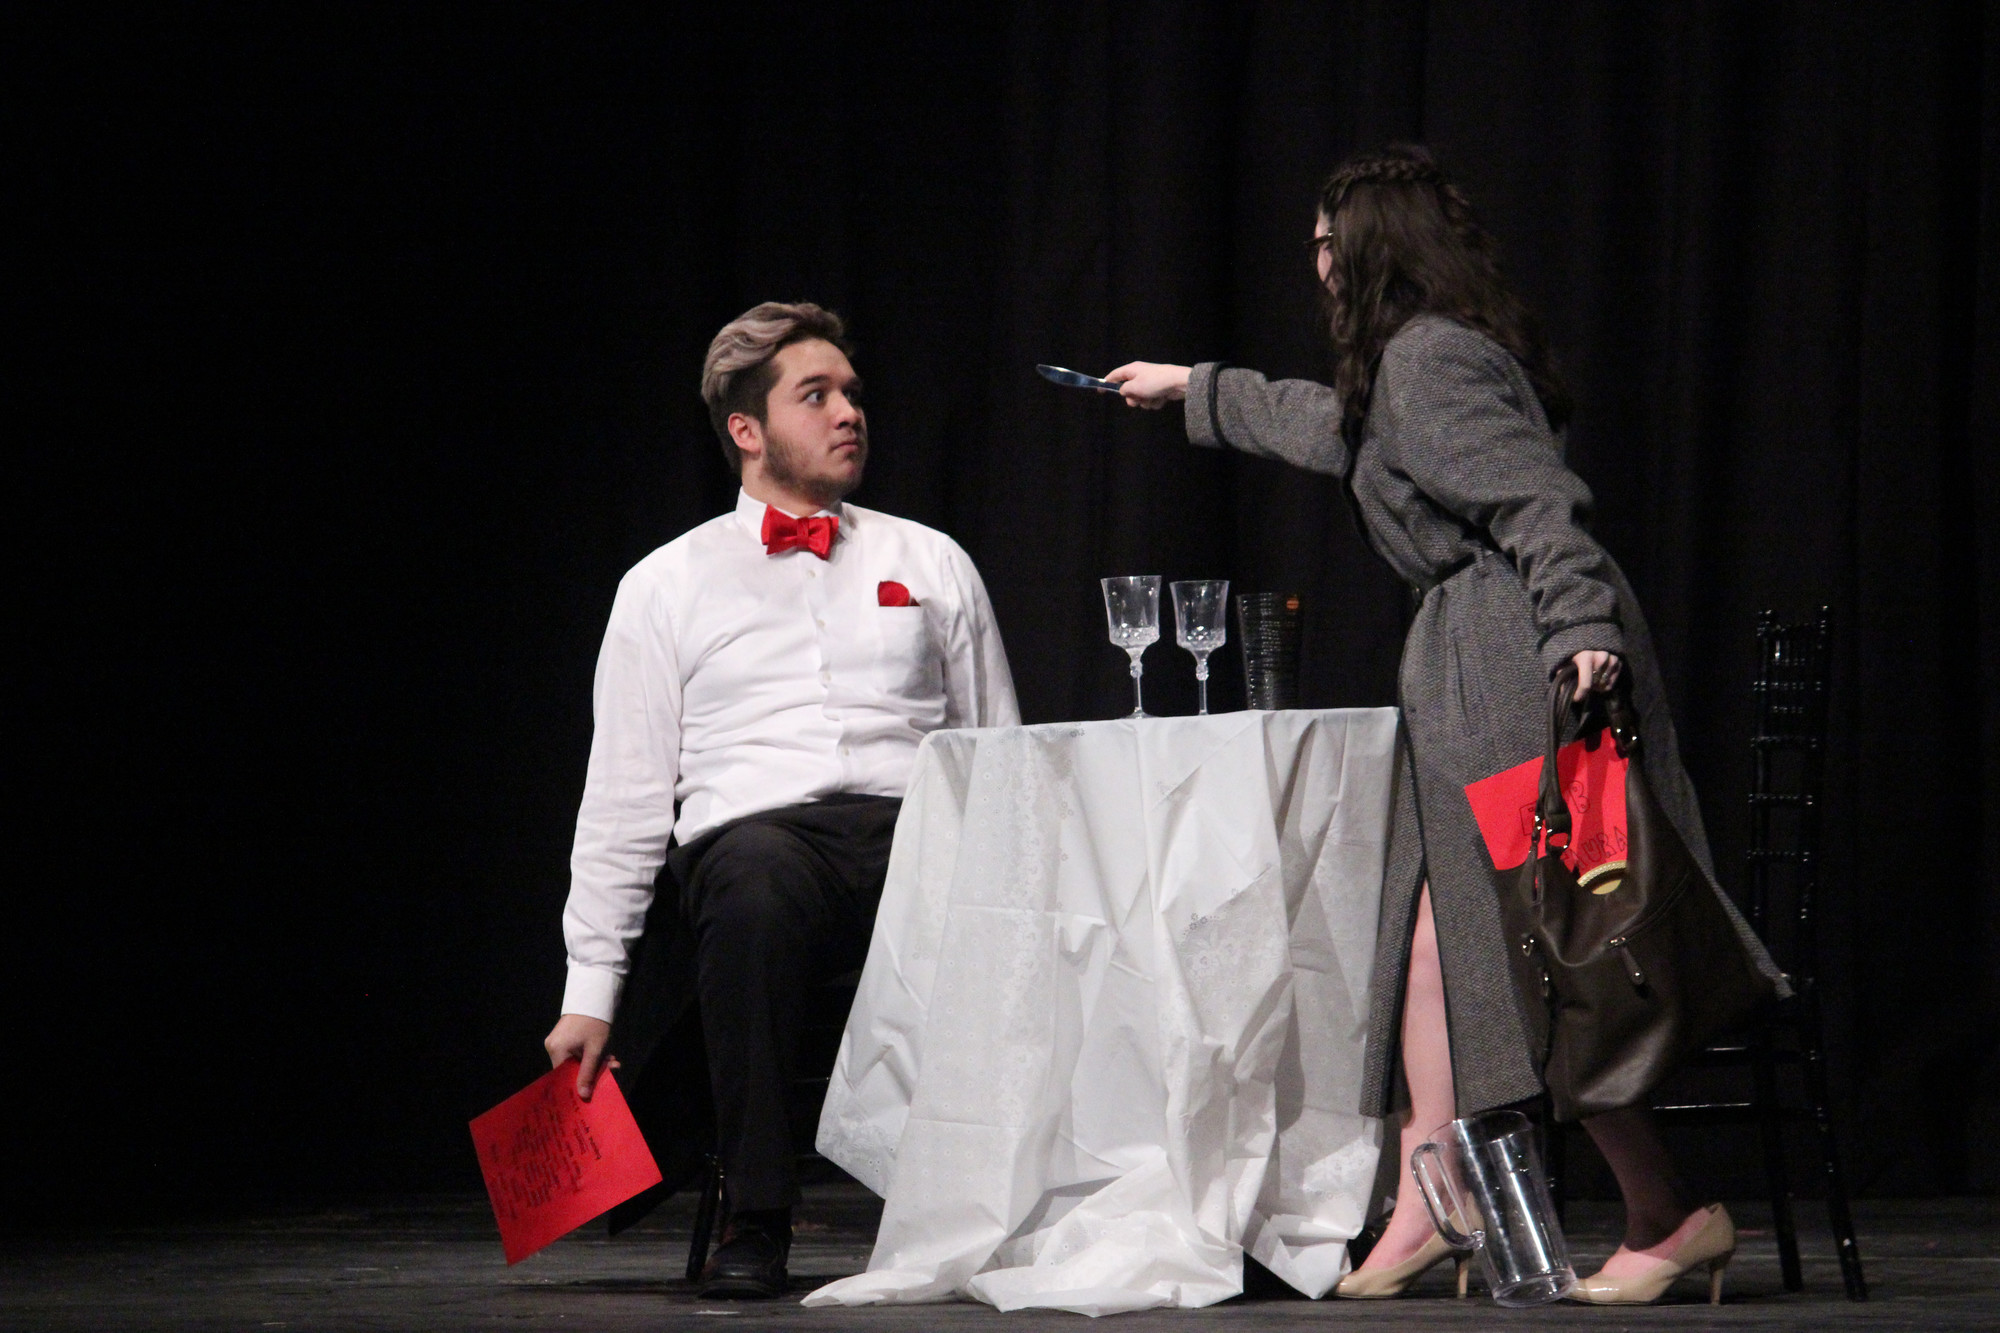 Connor Coniglio is surprised when his date, Isabel Logios, pulls a knife on him during a blind date in “Check, Please.”